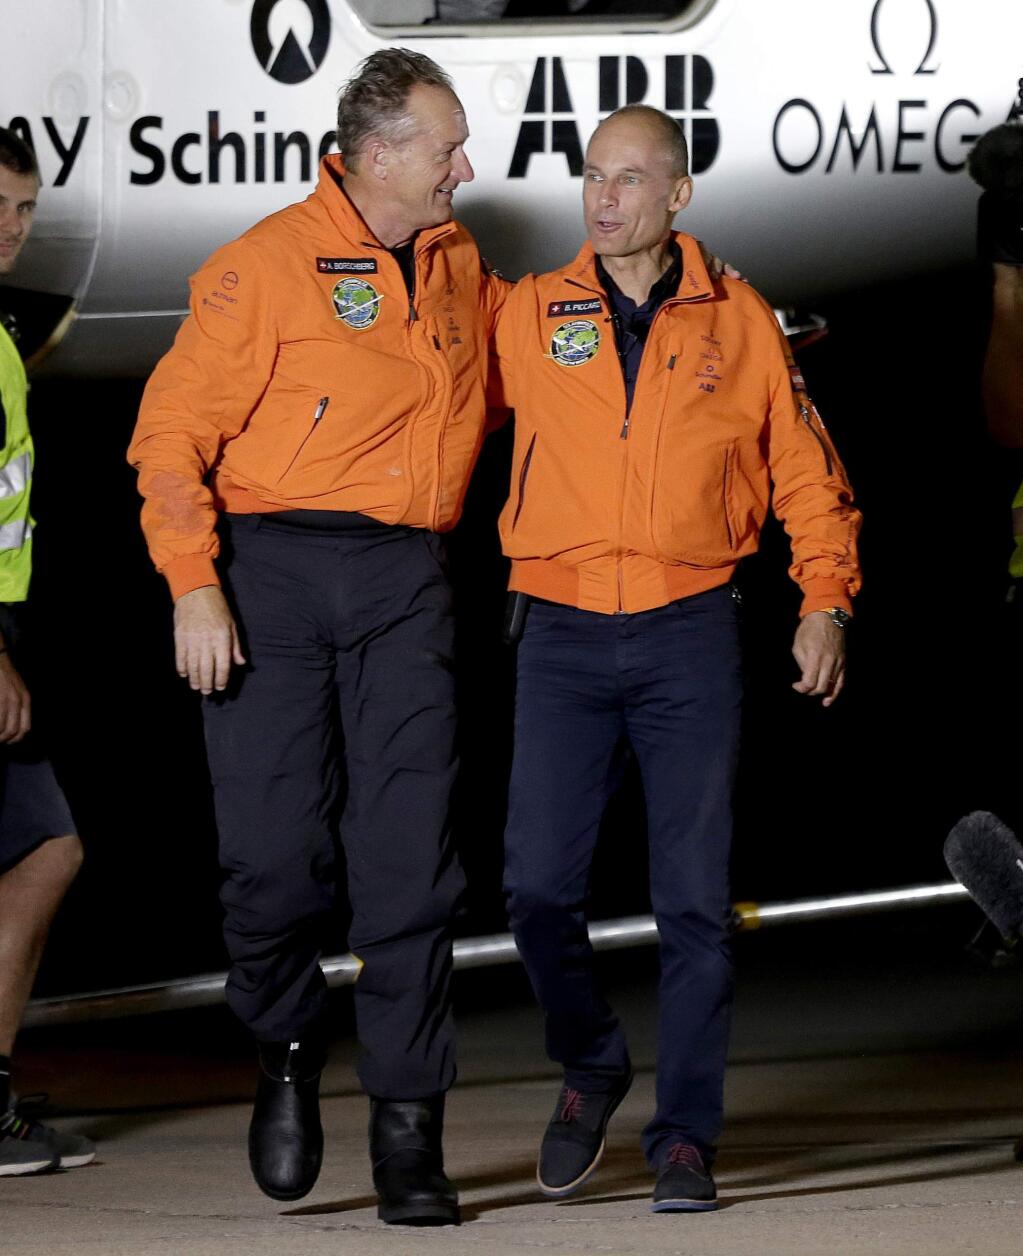 Pilot Andre Borschberg, left, and pilot Bertrand Piccar walk together after Borschberg exited the cockpit of the Swiss-made Solar Impulse 2 plane, Monday, May 2, 2016, in Goodyear, Ariz. The plane left early Monday from California for a 16-hour trip to Phoenix to resume its journey around the world using only energy from the sun. (AP Photo/Matt York)